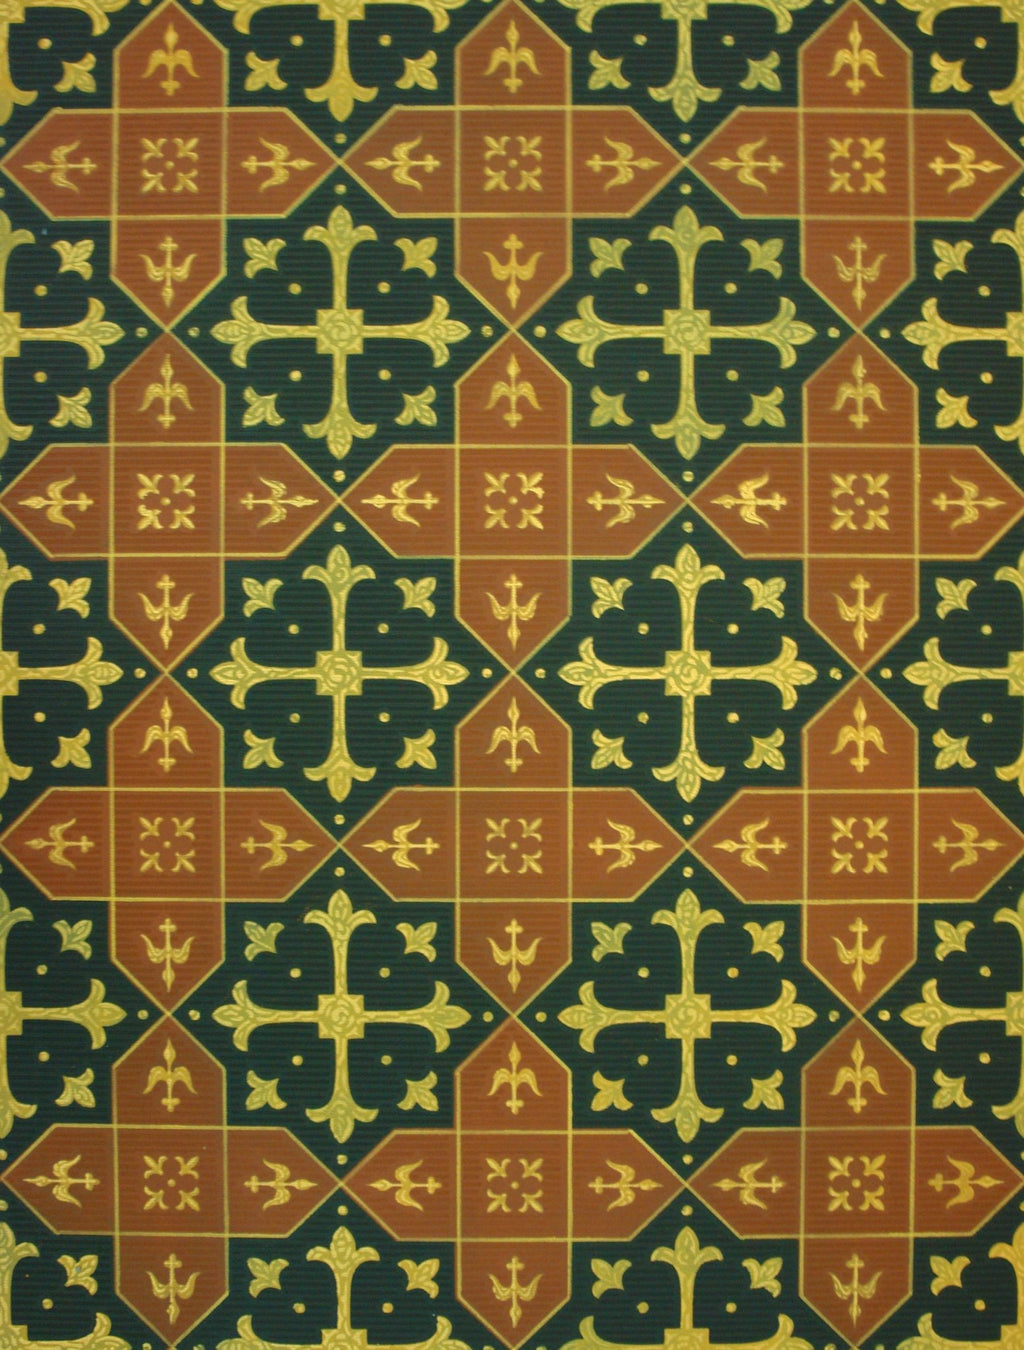 A close up of the Hay House pattern, a classic encaustic tile pattern with its cross and star structure, enhanced with gothic detailing.